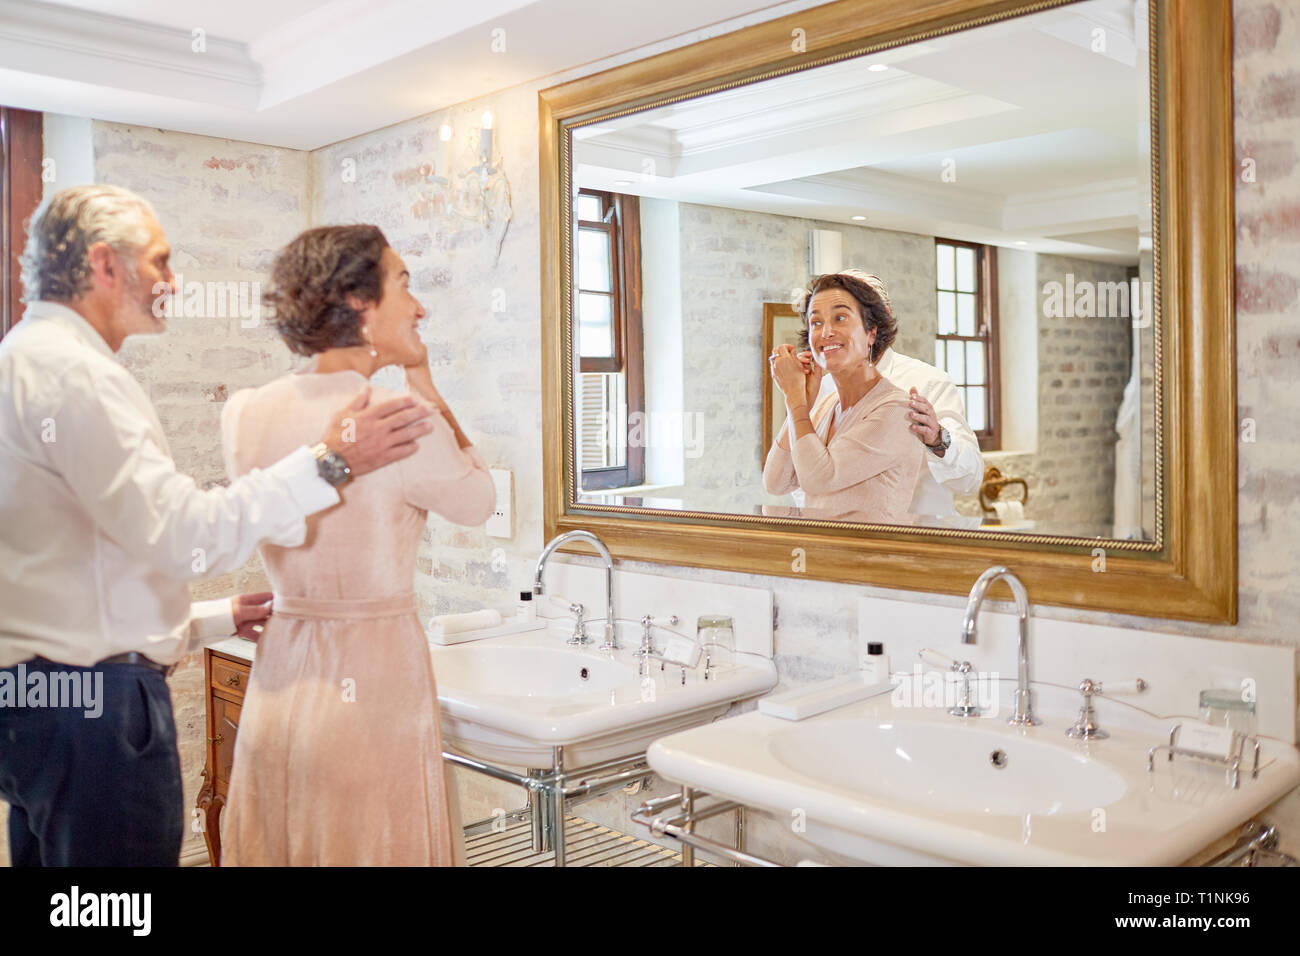 Couple getting ready in hotel bathroom mirror Stock Photo